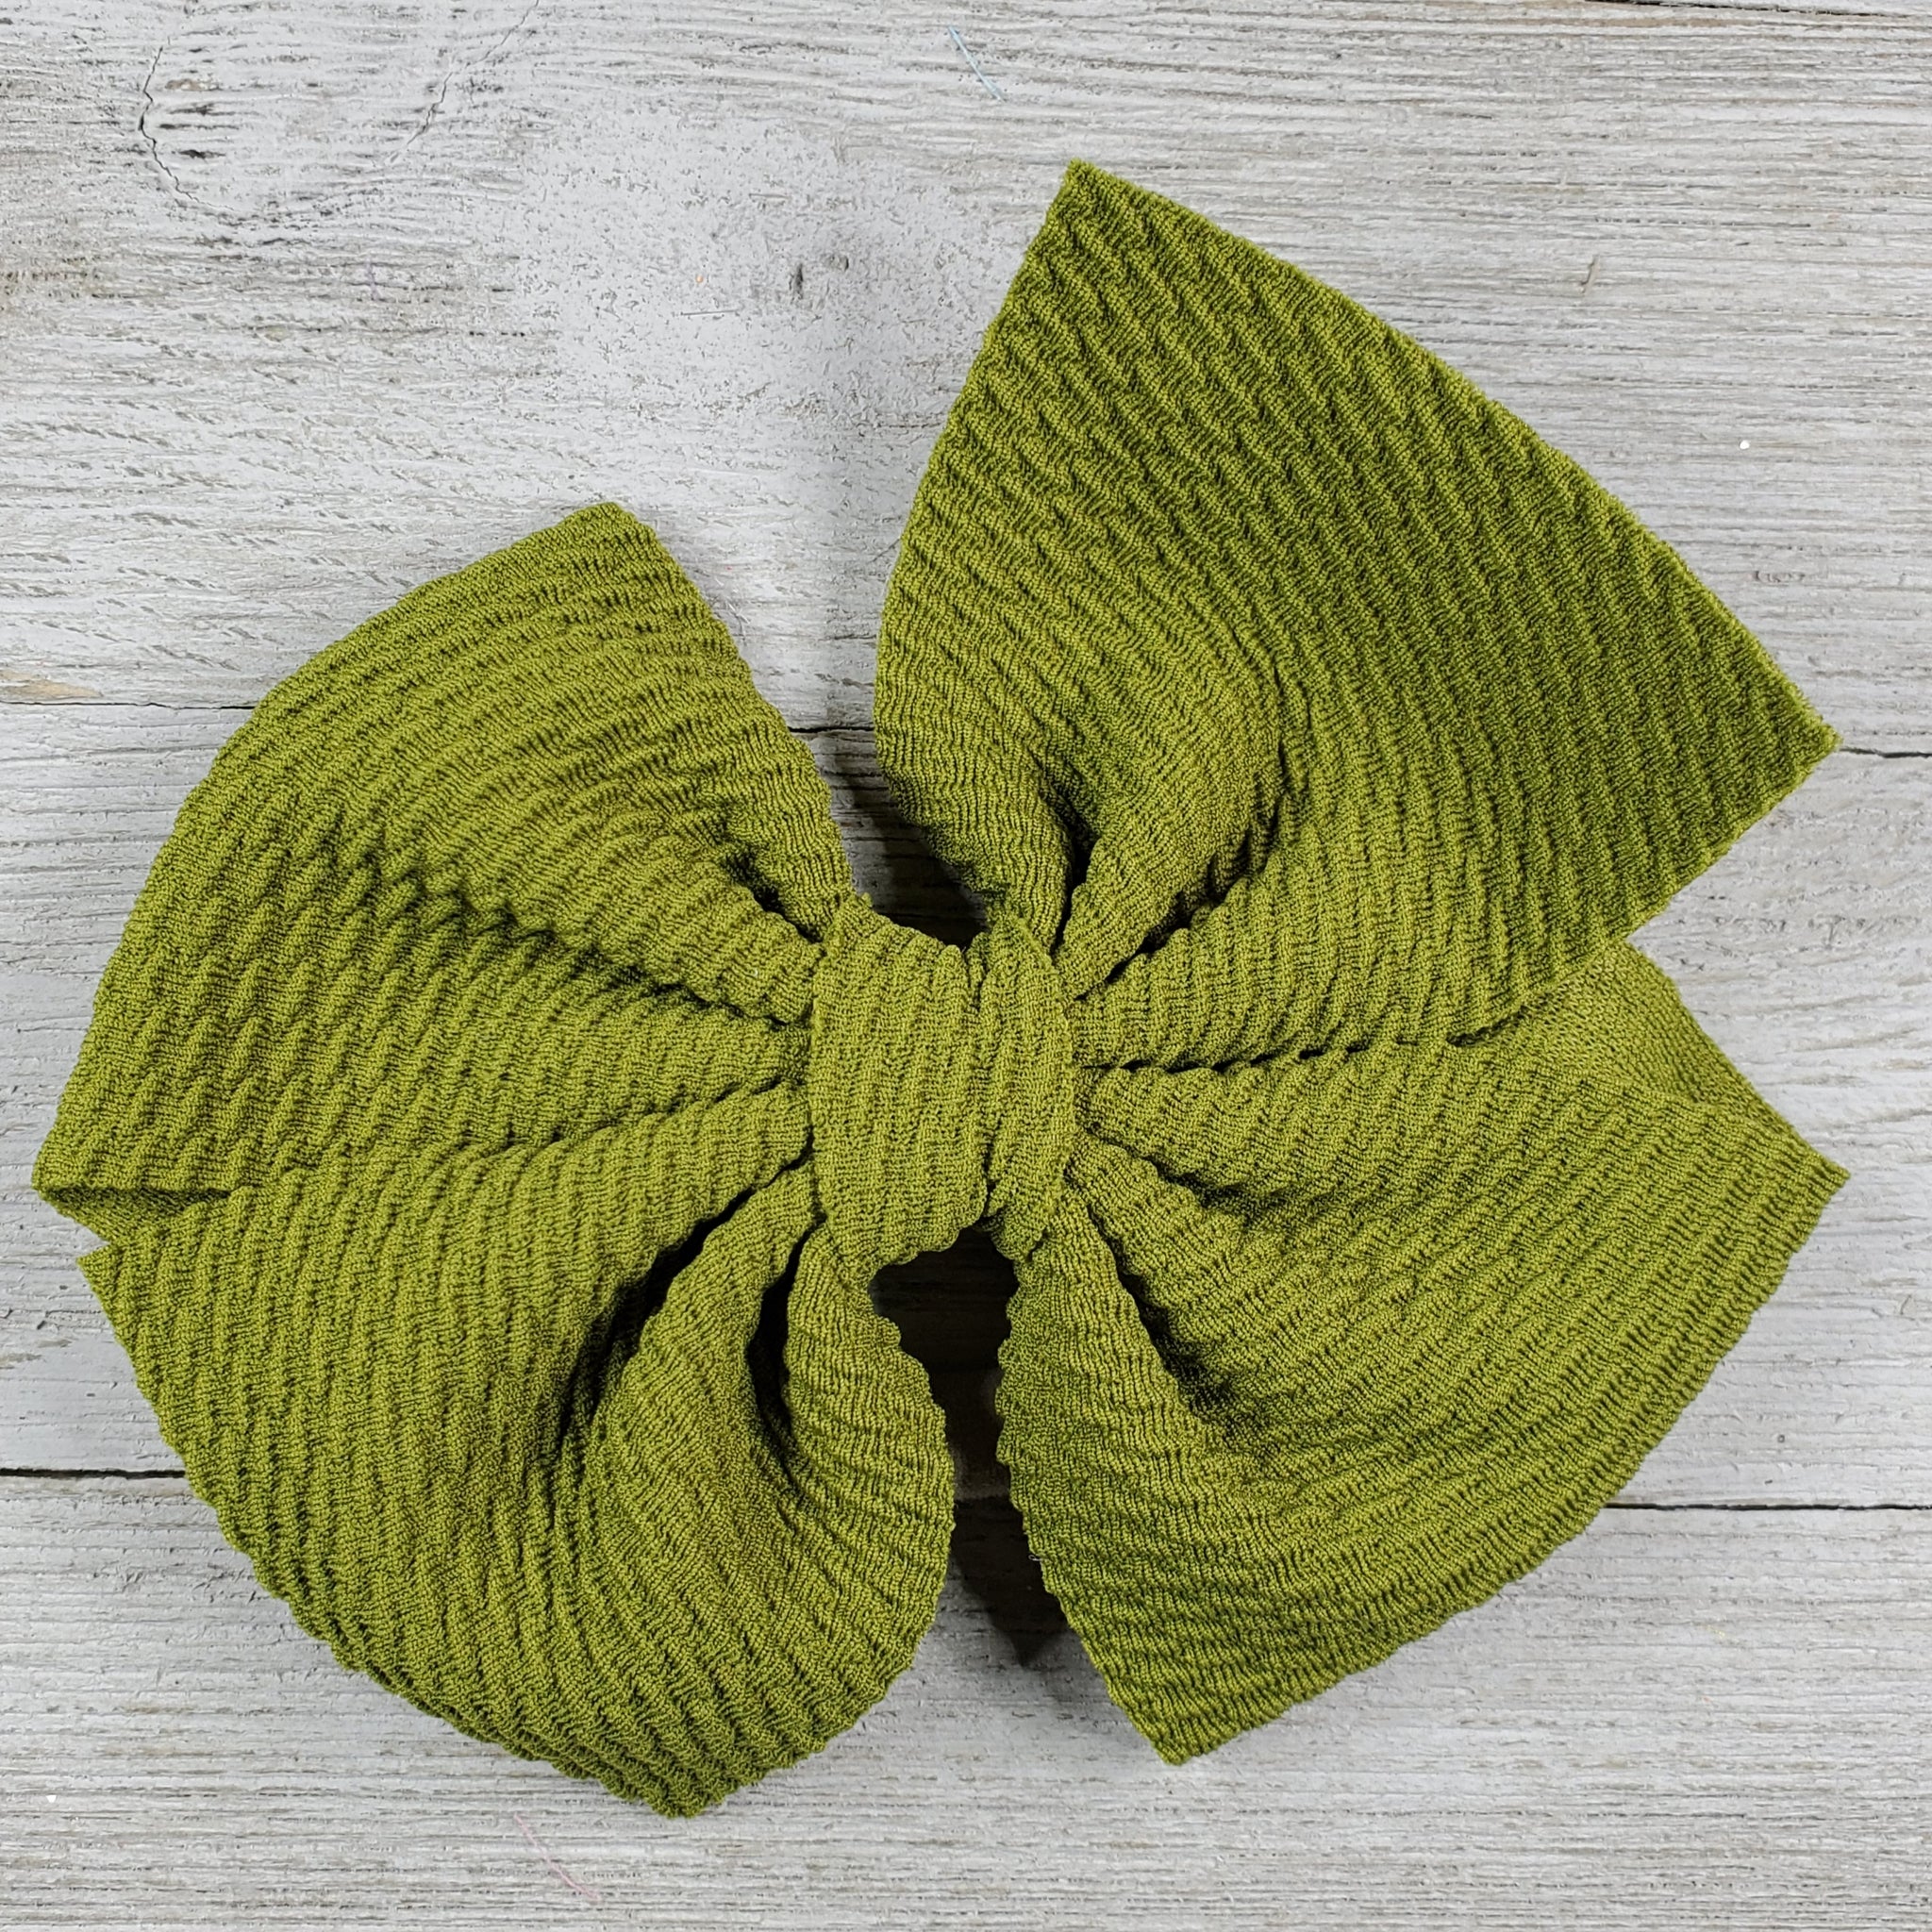 Bow 4.5in Headband or Clip - Green